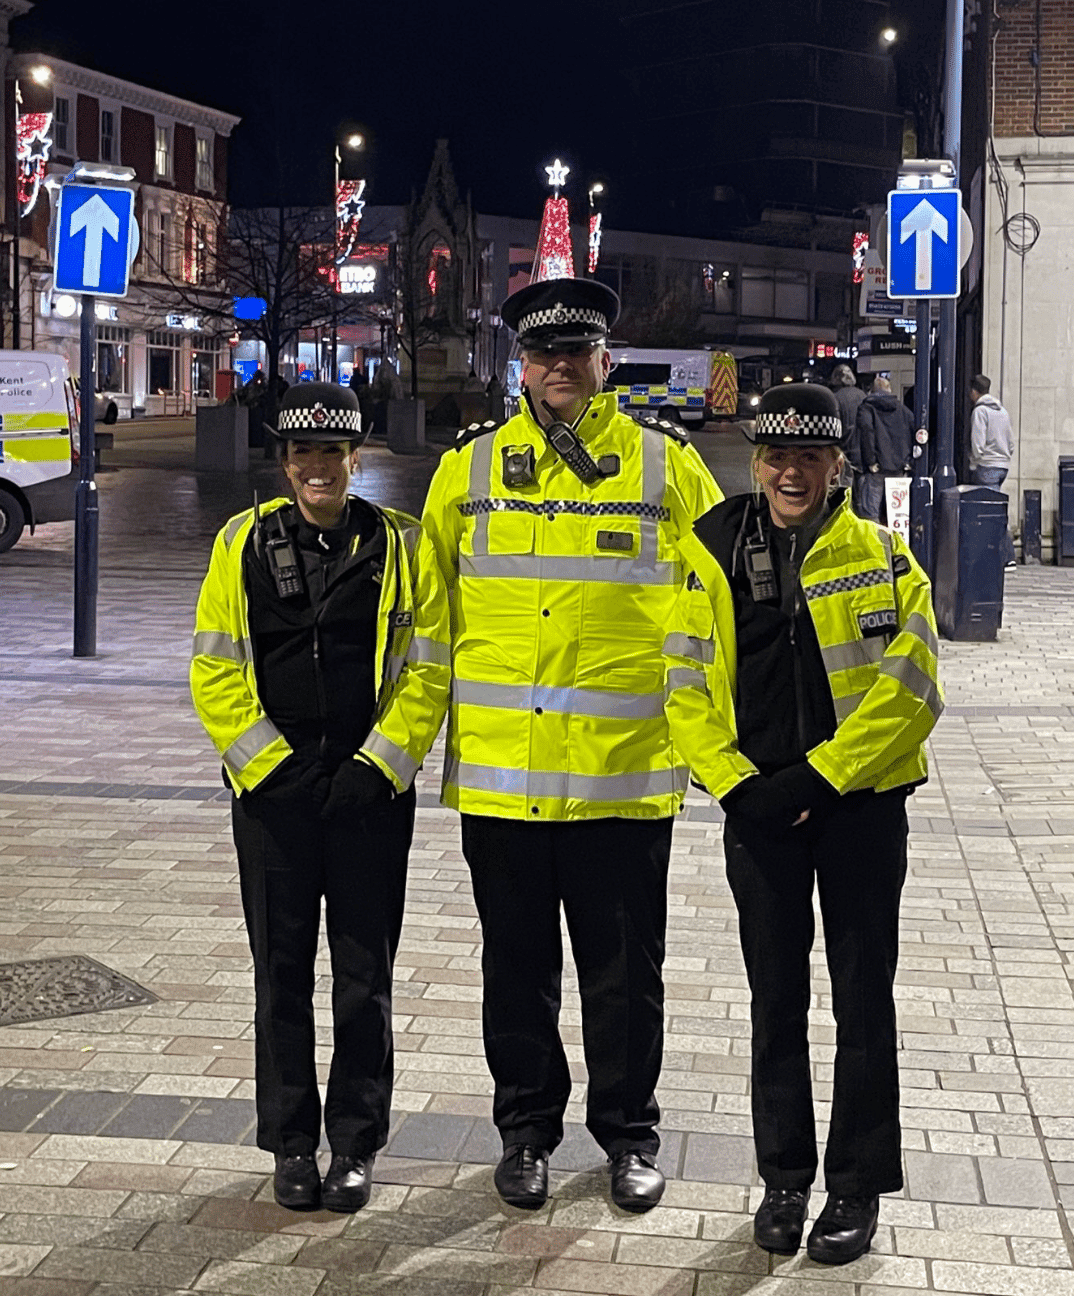 Increased Patrols To Help You Enjoy The World Cup Safely And Responsibly